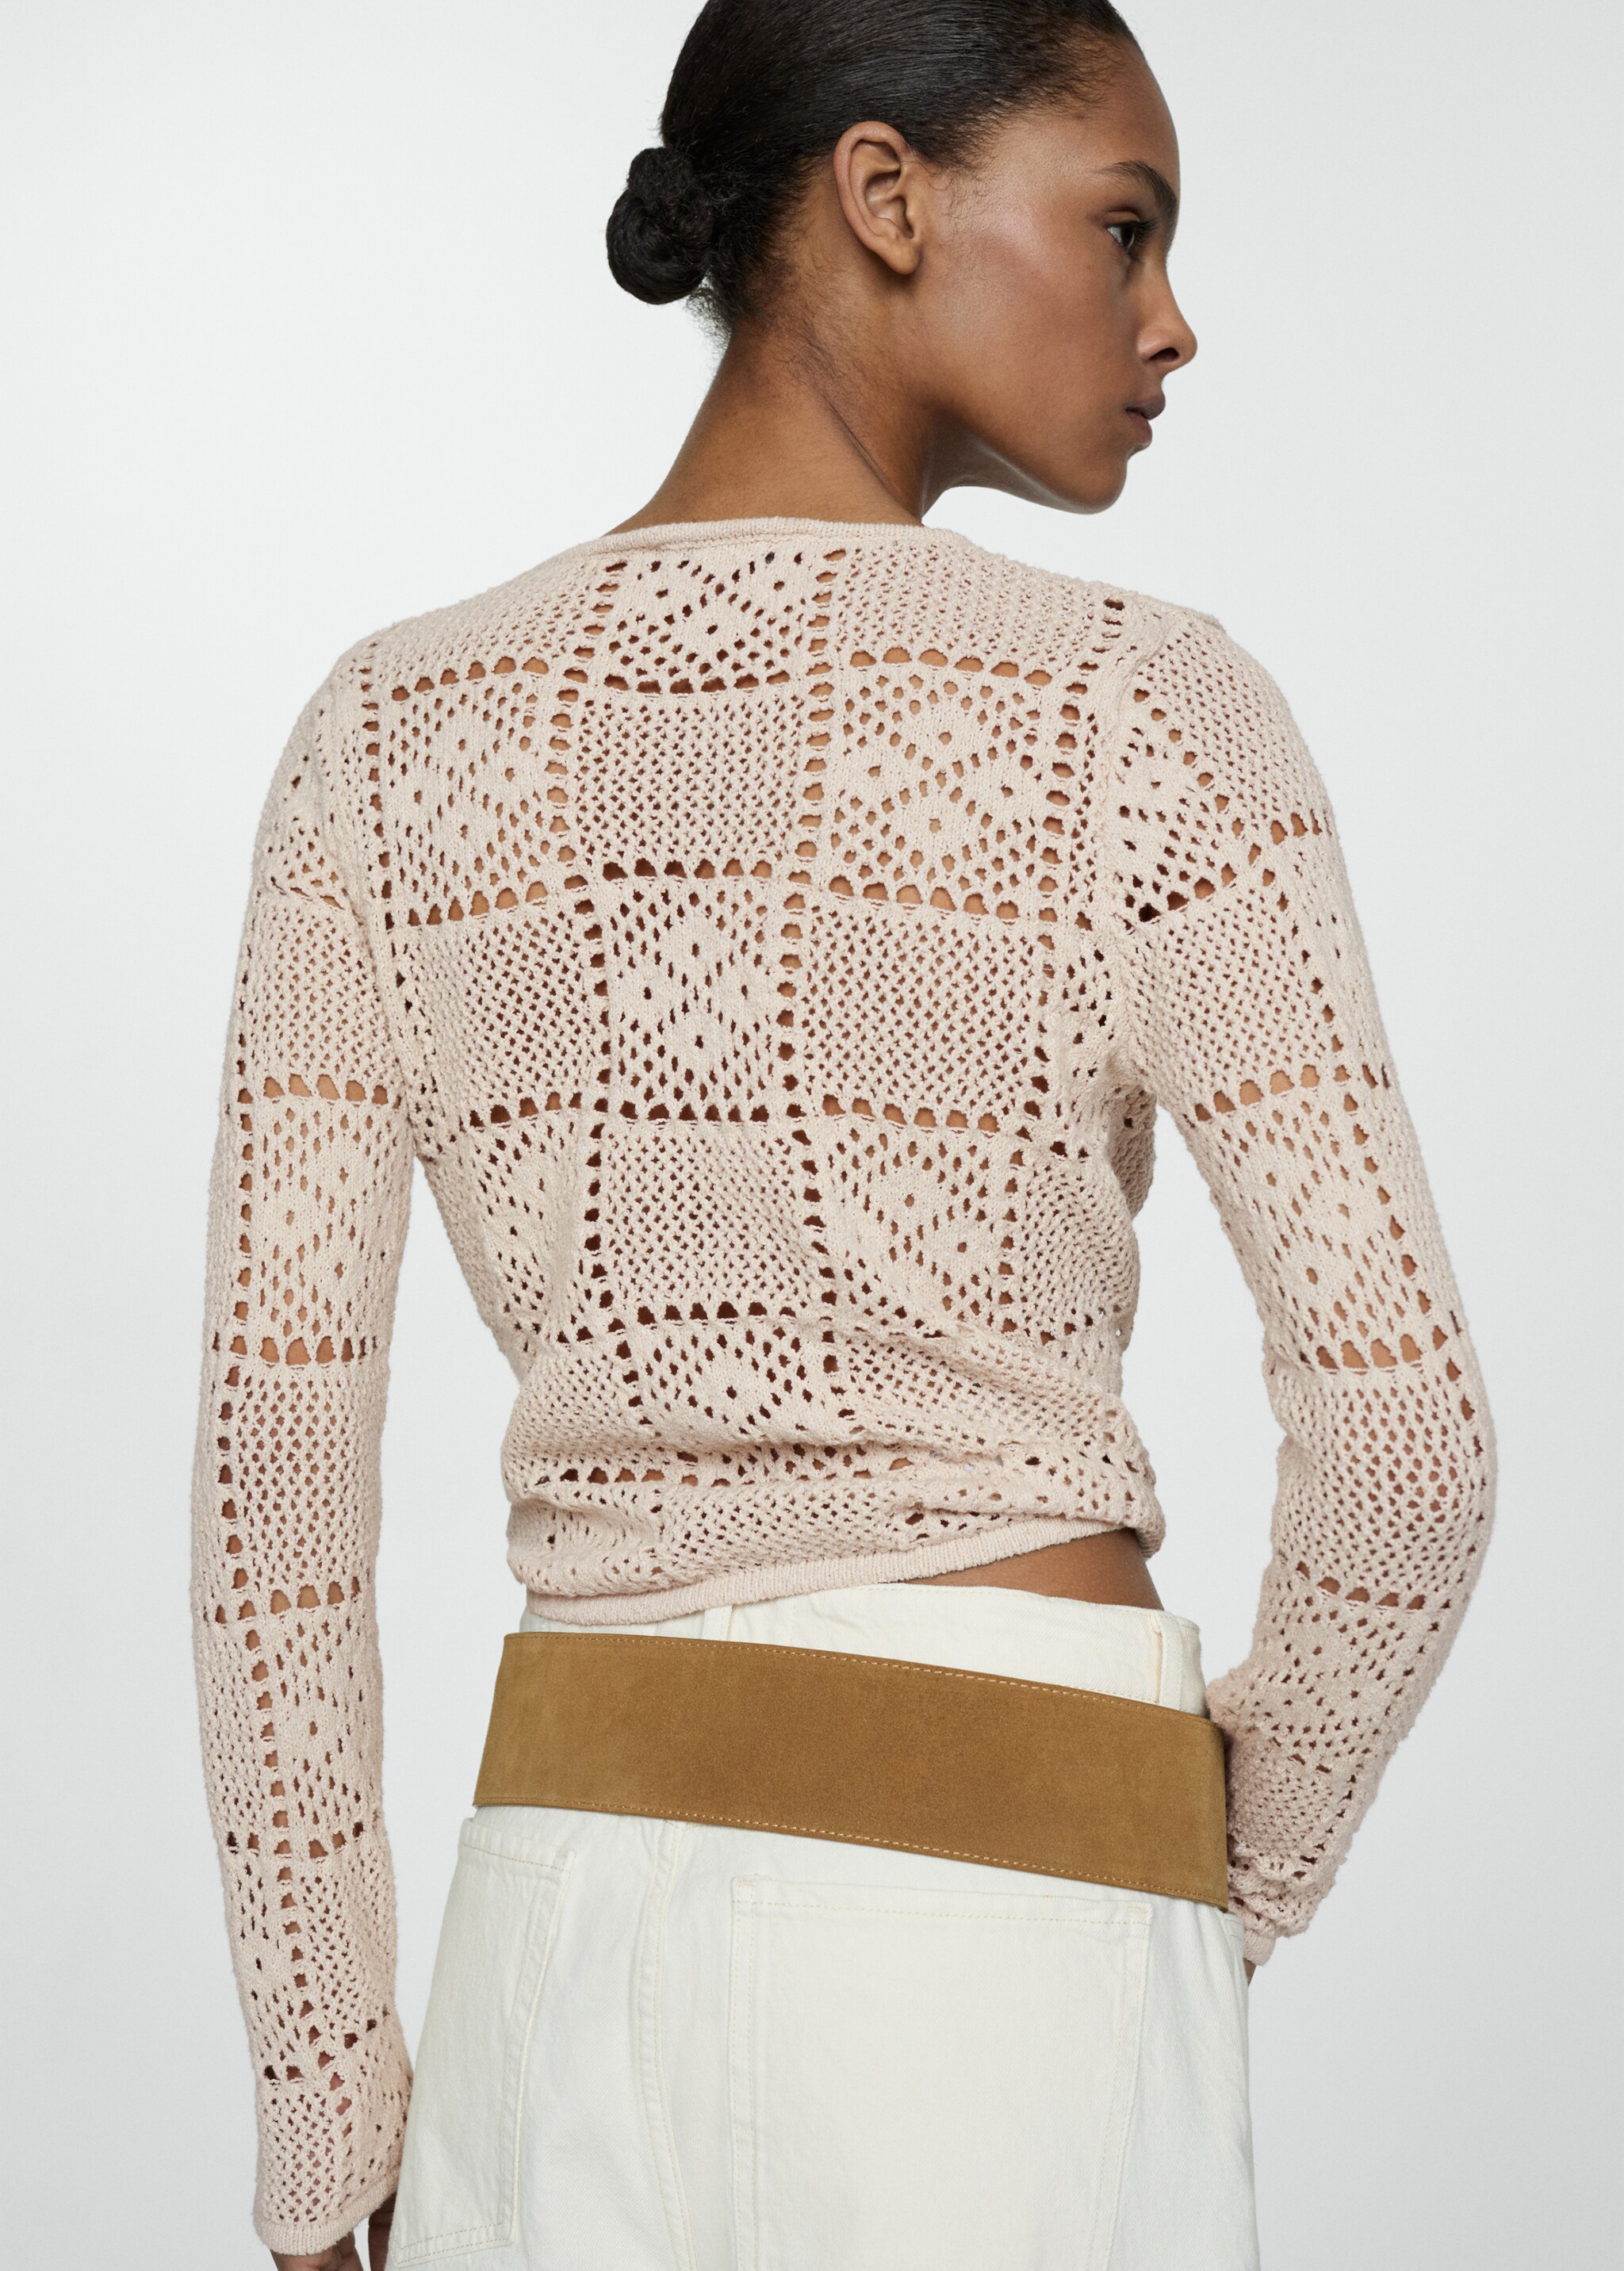 Crochet sweater with openwork details - Reverse of the article